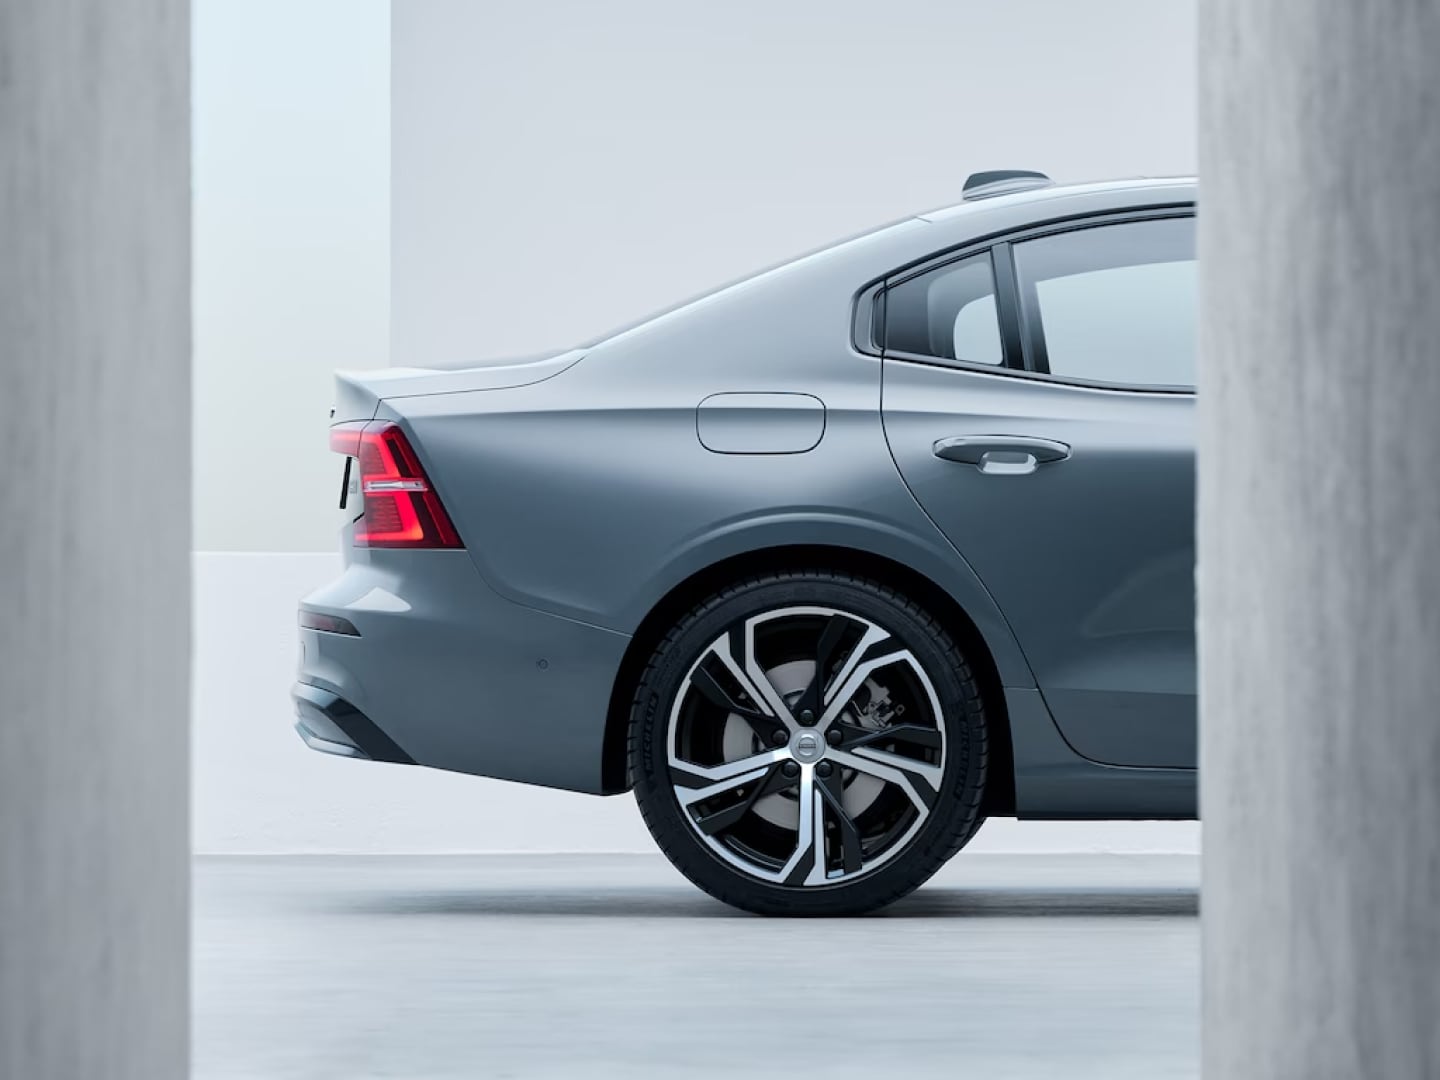 Volvo S60 mild hybrid side exterior and hubcap.